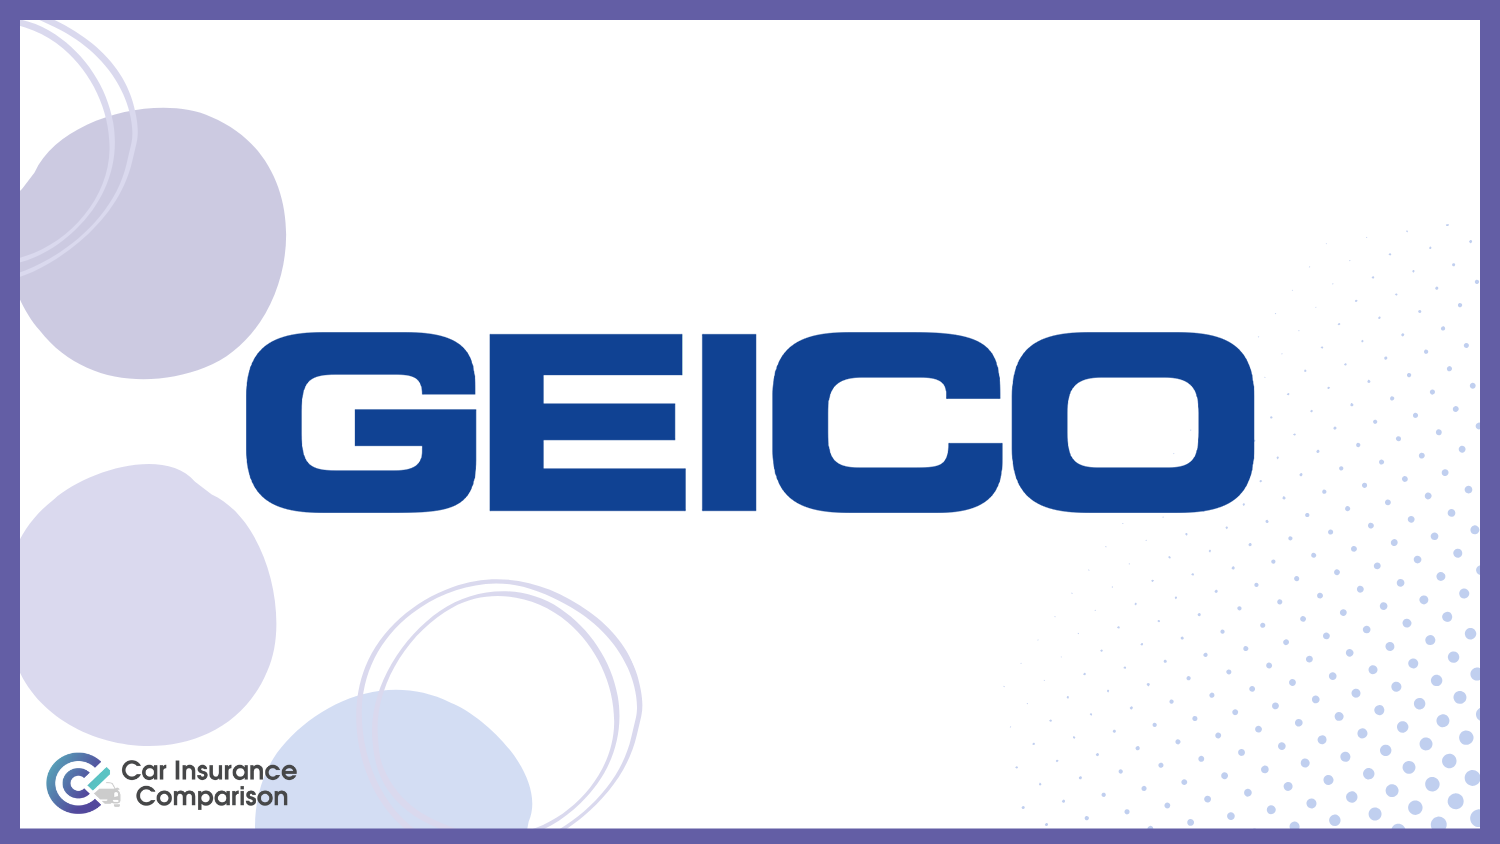 Geico: Best Car Insurance for Drivers Under 25